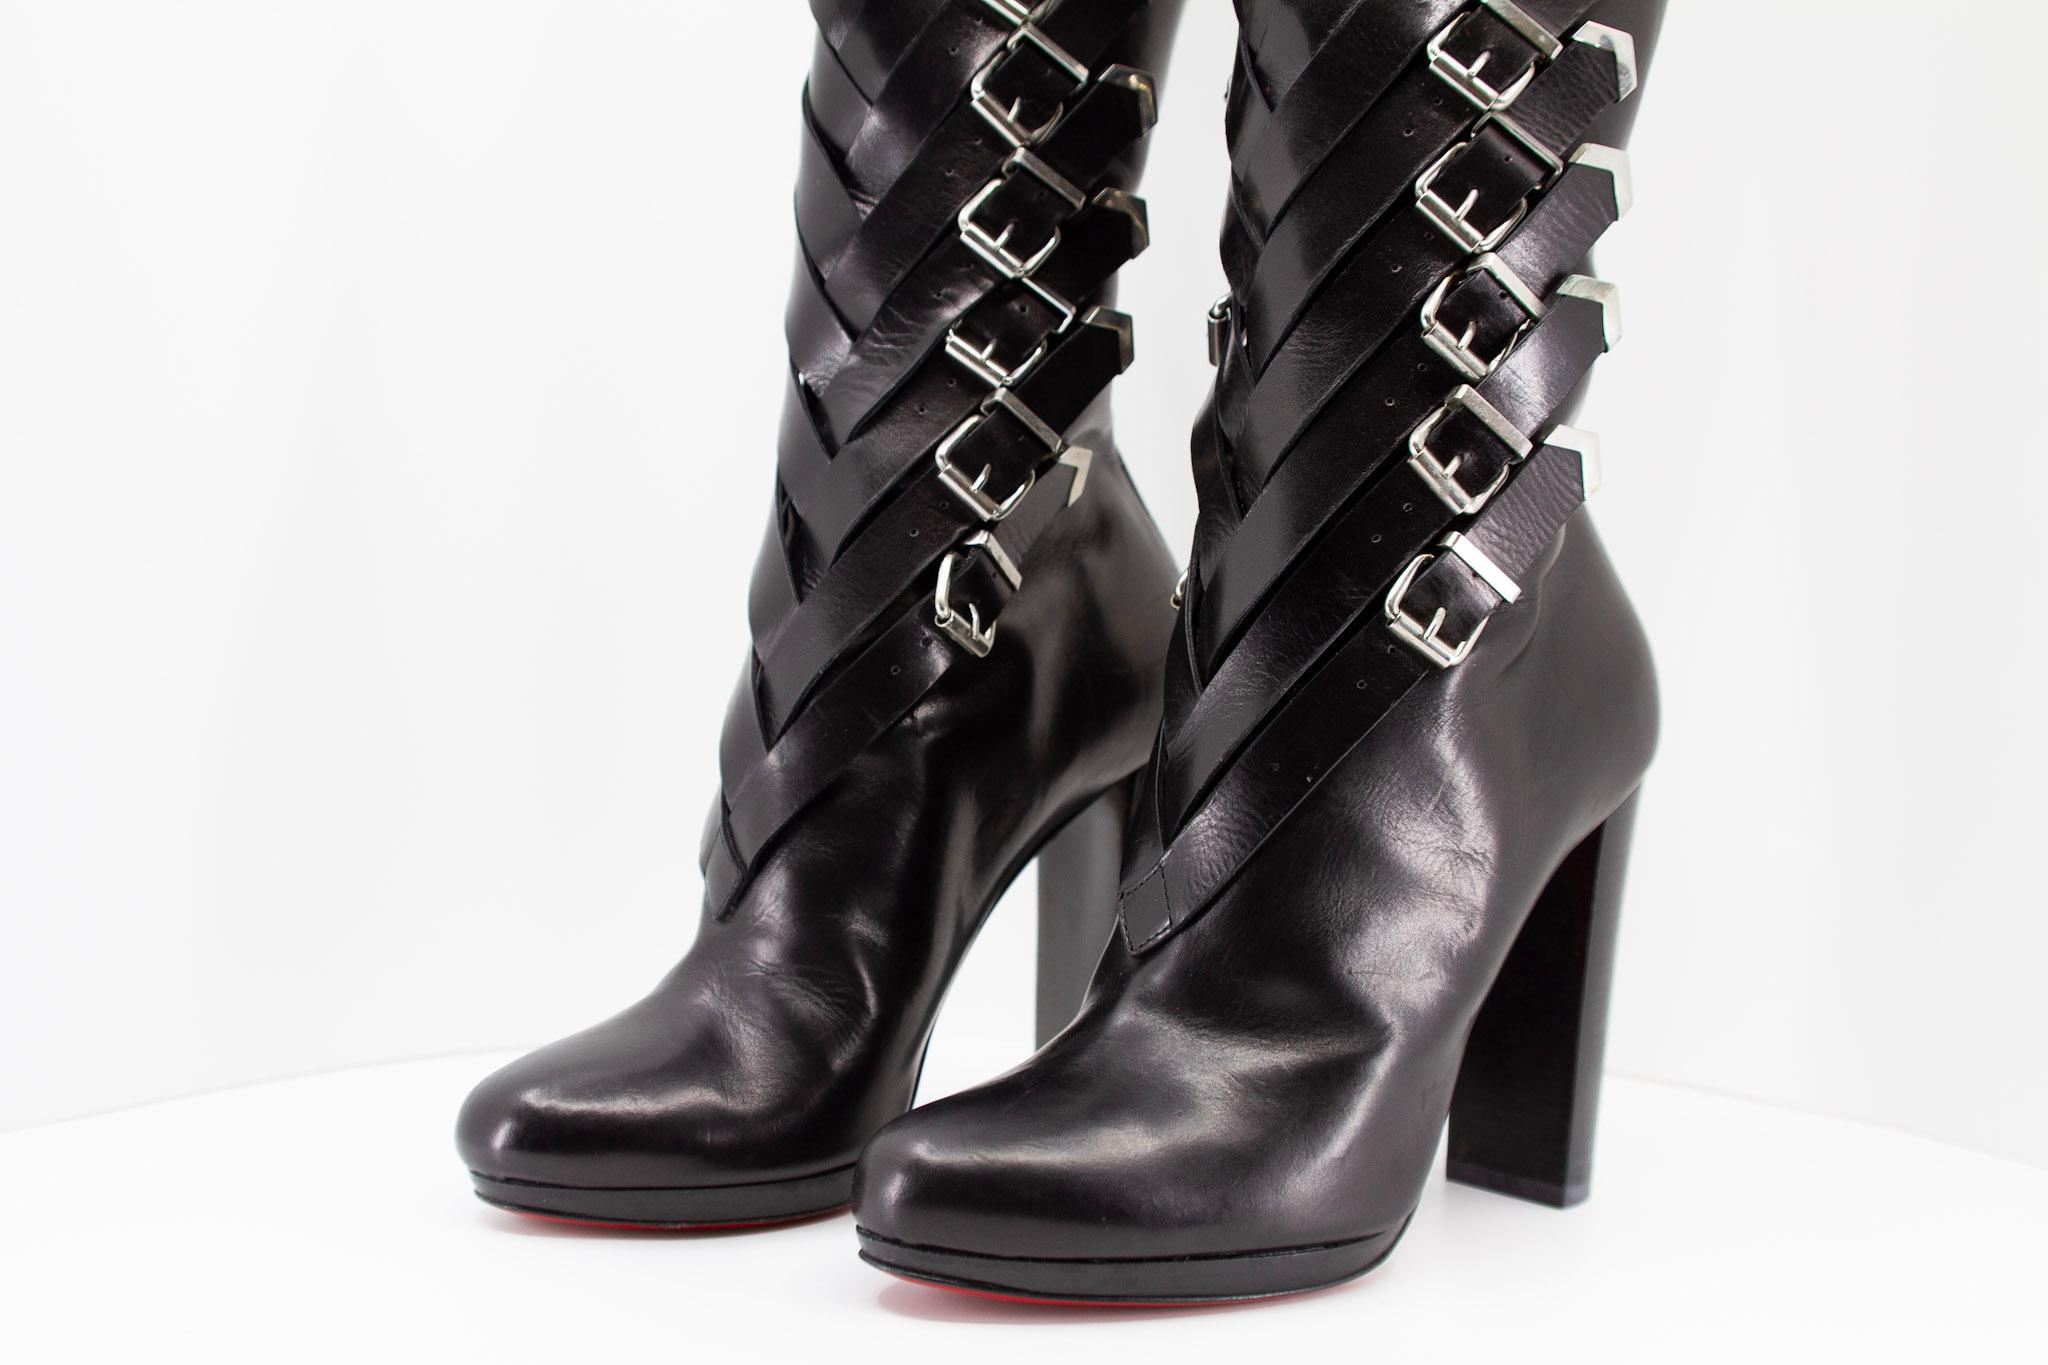 Rare Knee High Christian Louboutin Black Leather Boots For Sale 2